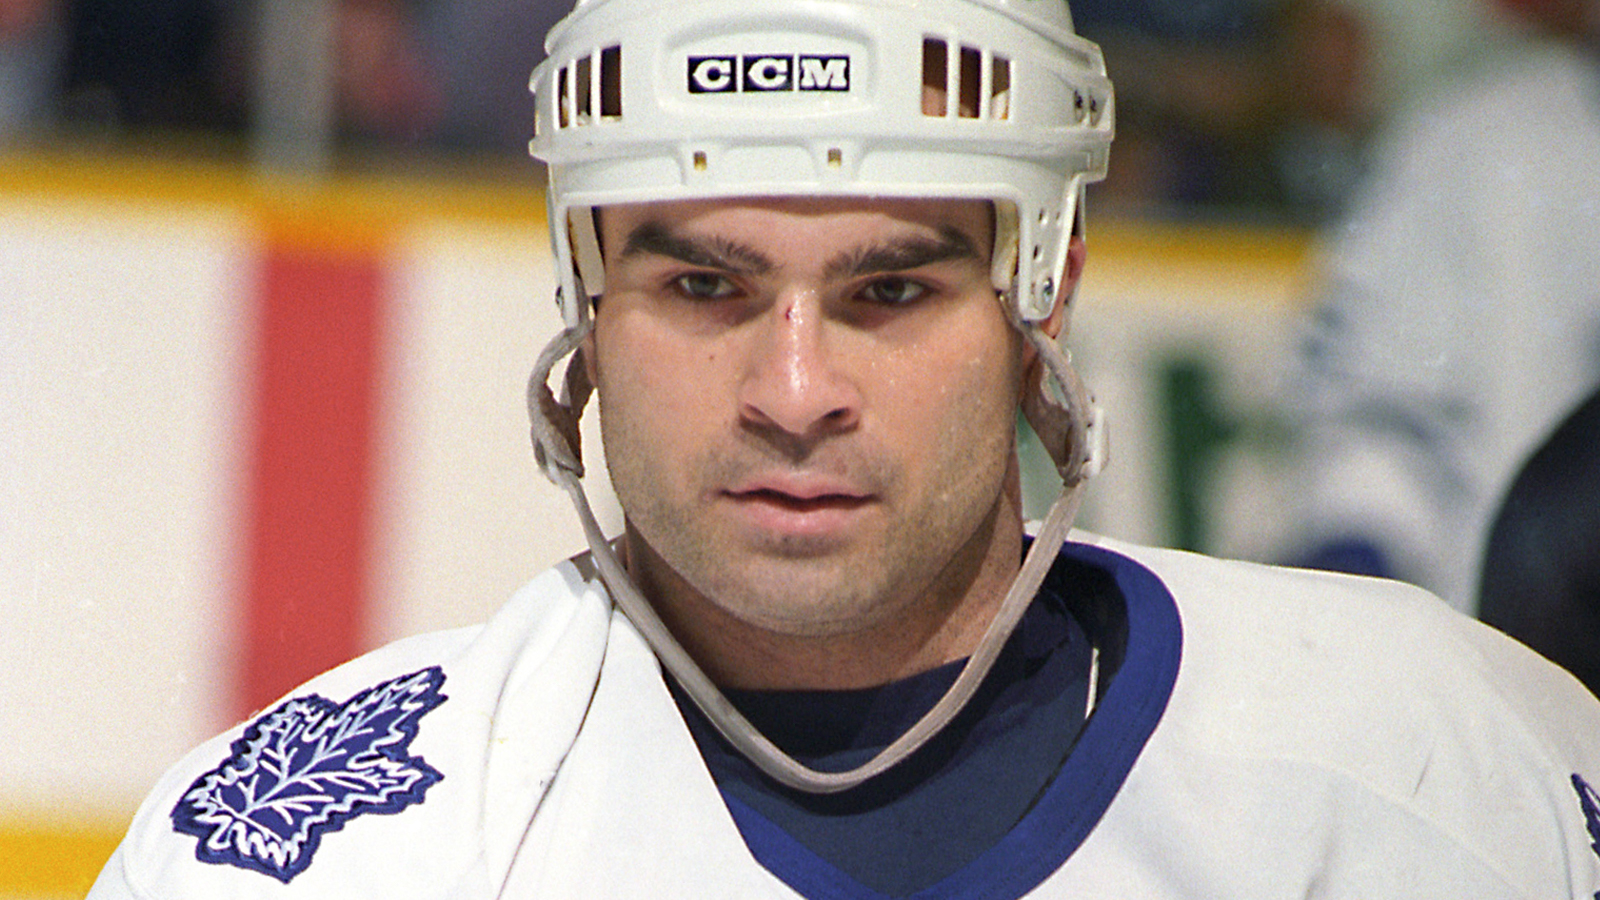 A picture of former Toronto Maple Leafs enforcer Tie Domi. : r/nhl